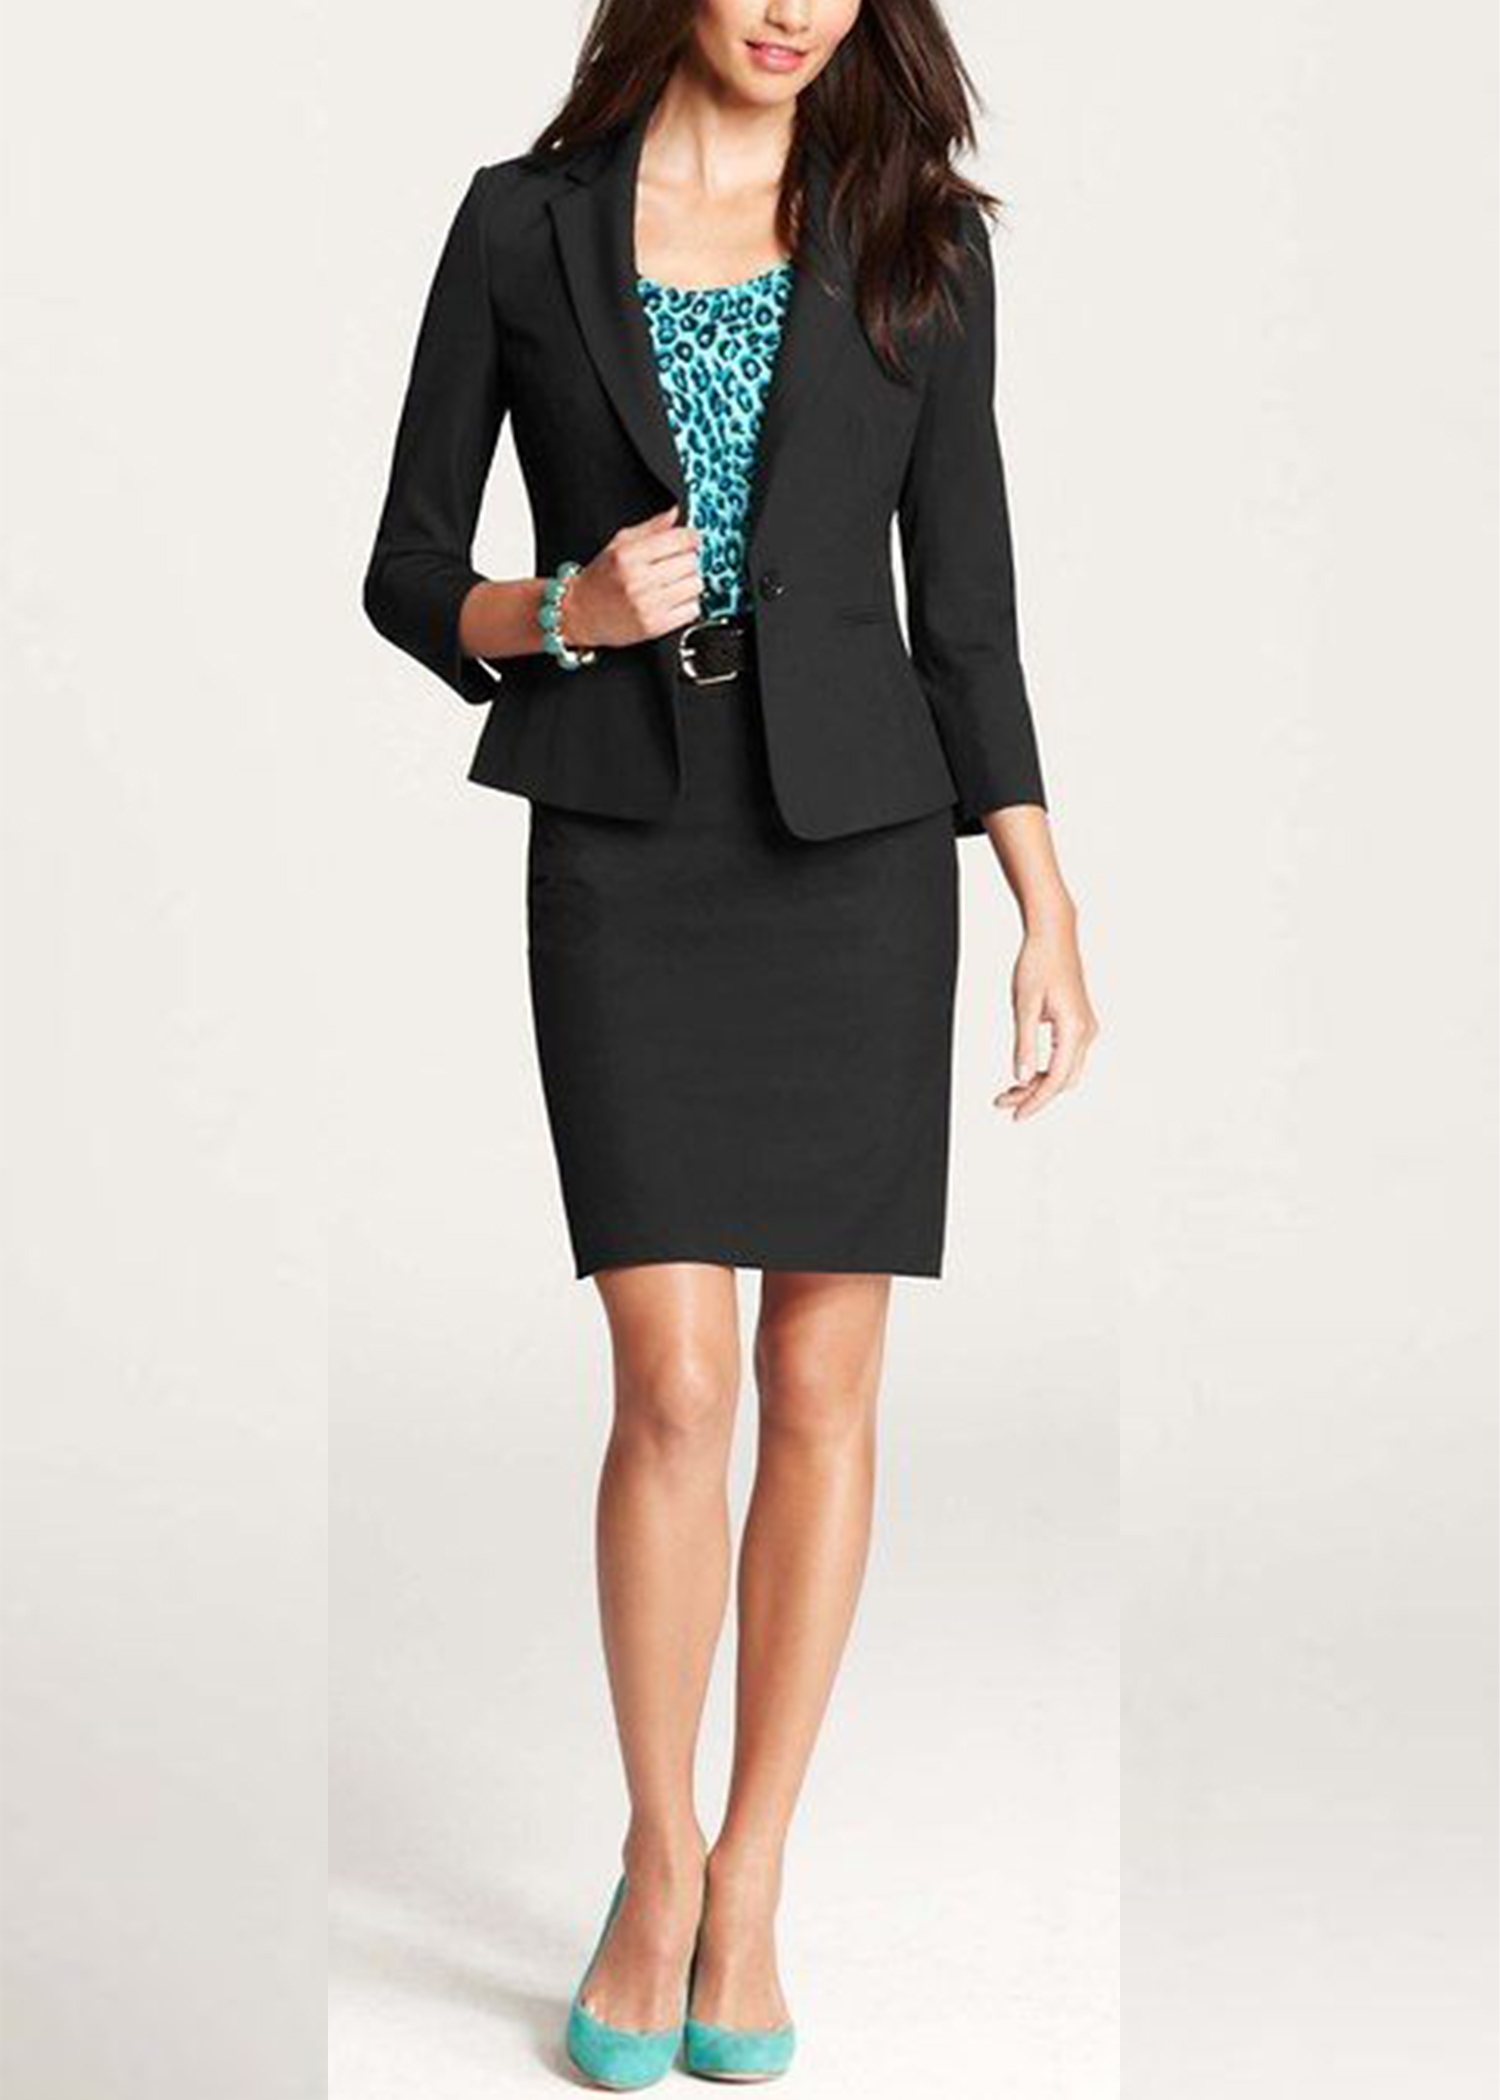 Crown Tailor - Skirt Suits